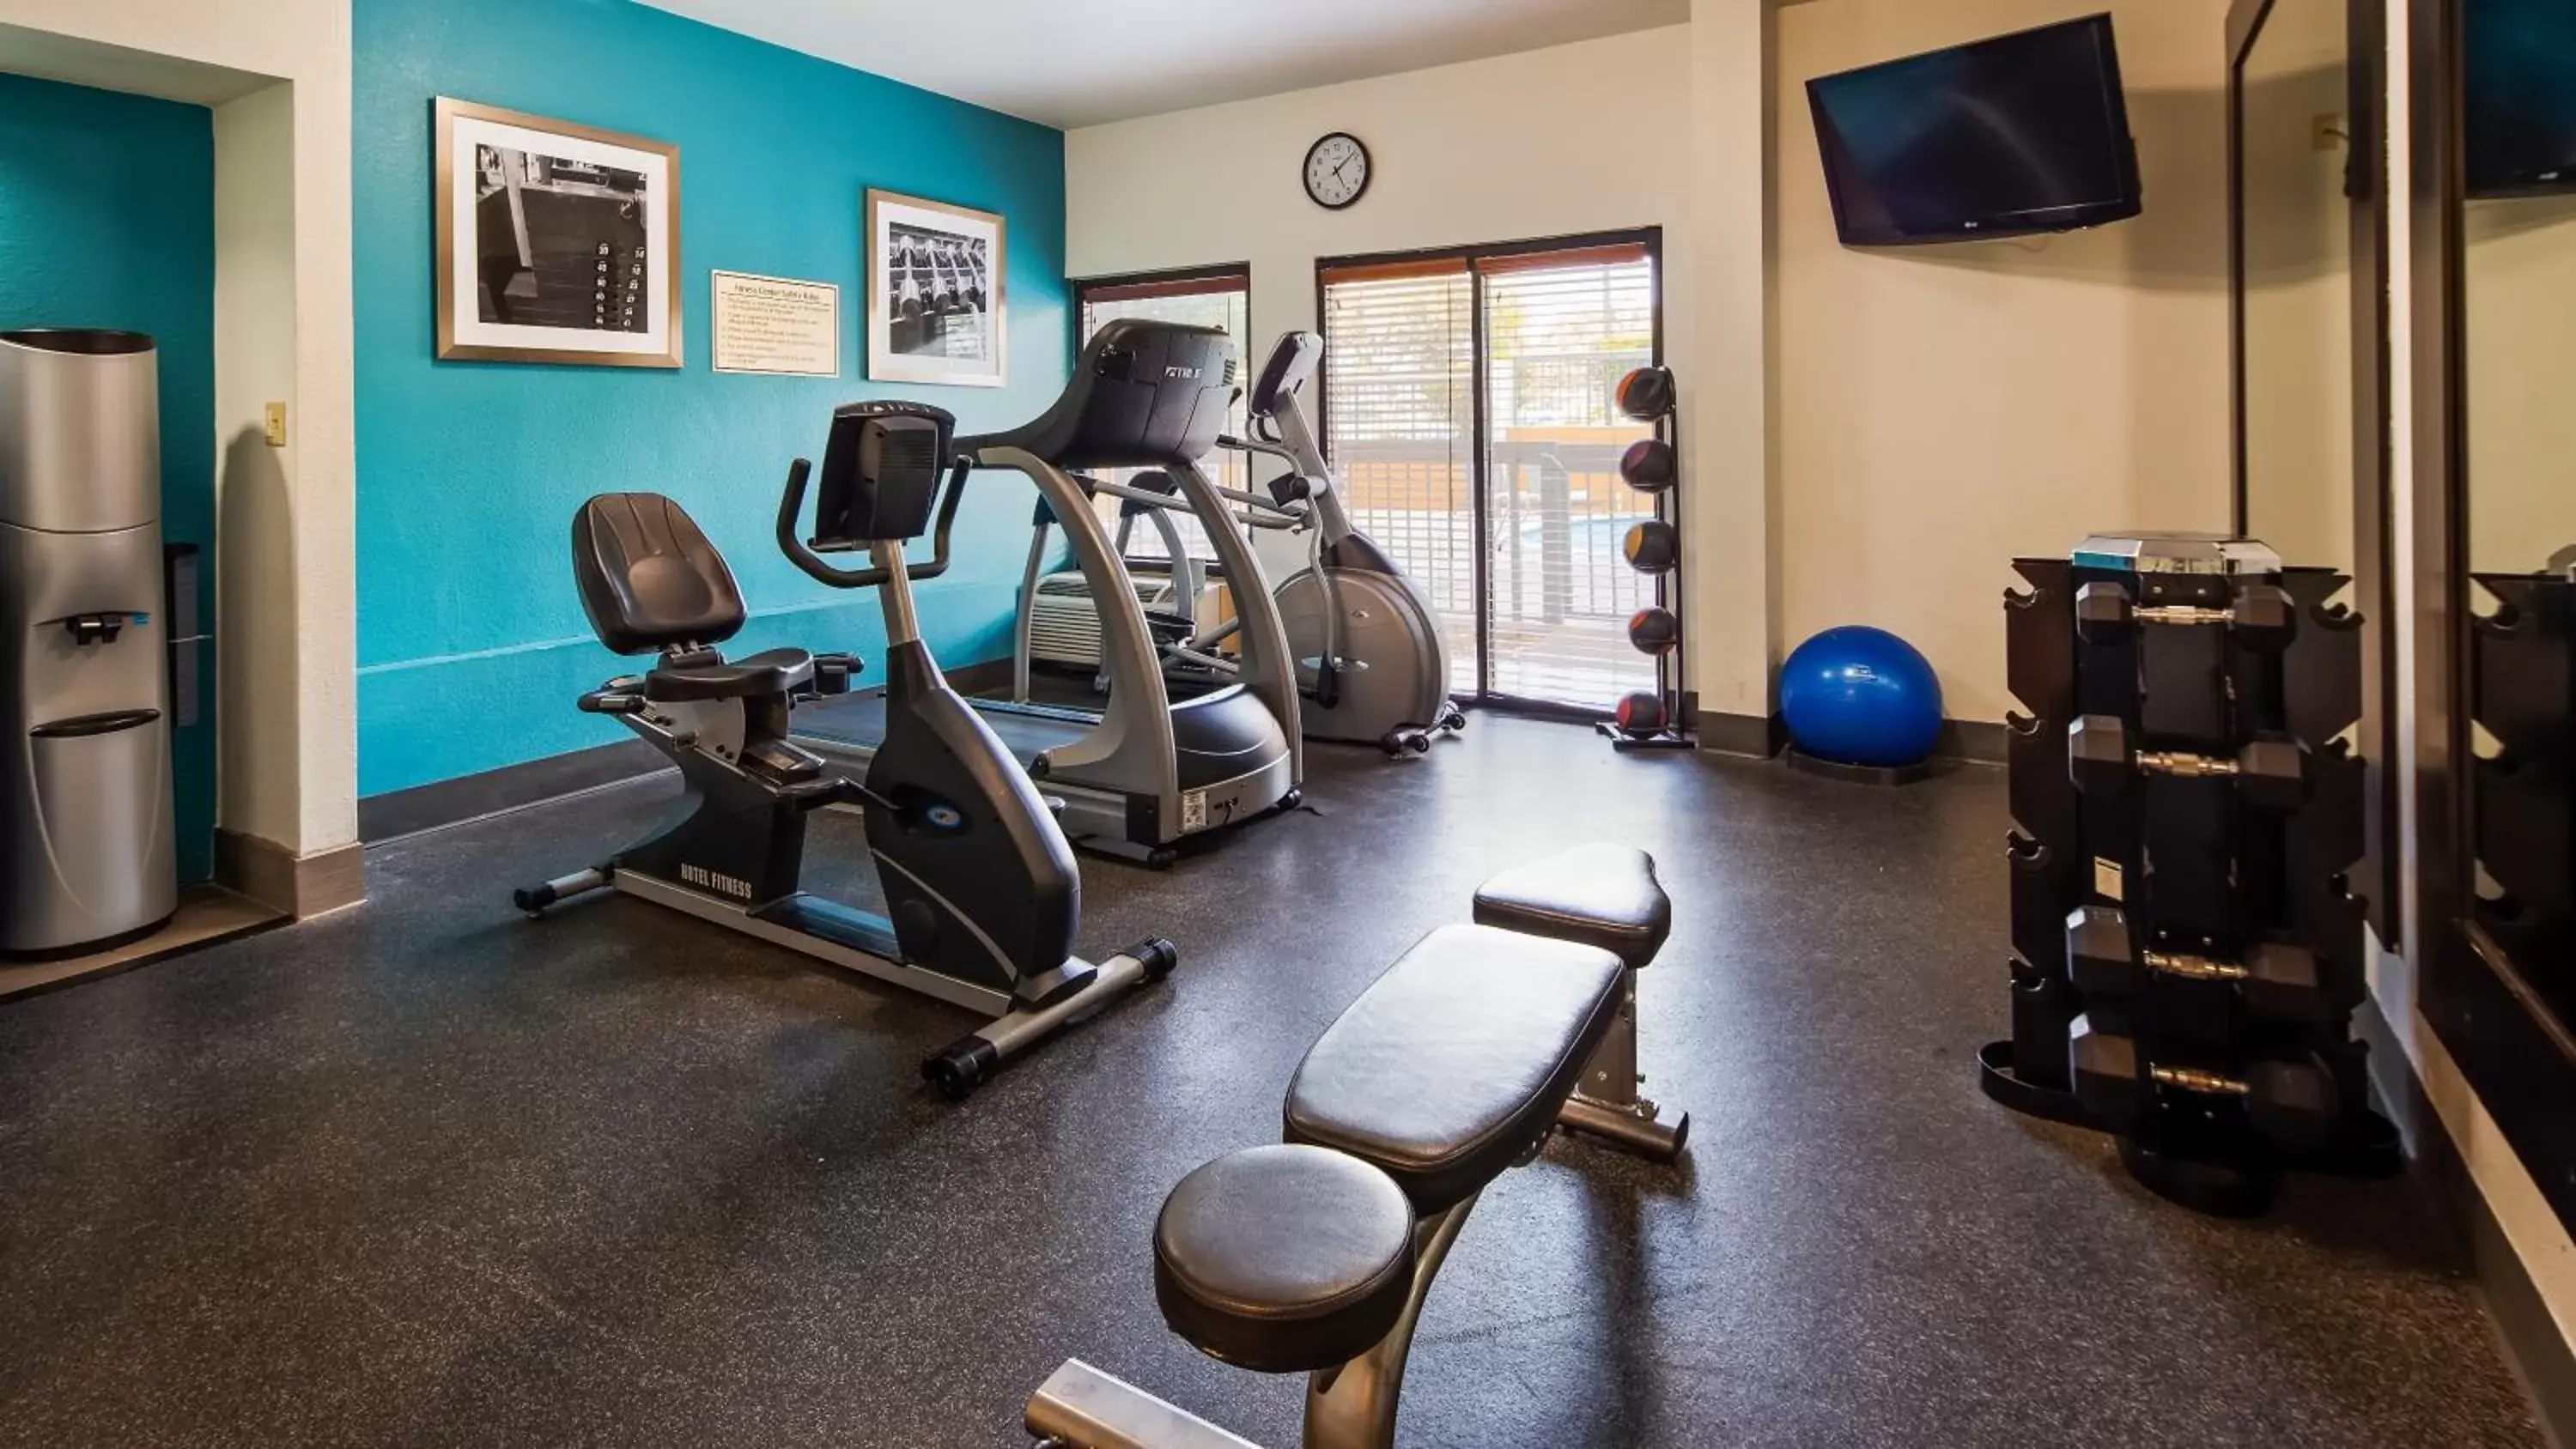 Fitness Center/Facilities in Clarion Pointe near Medical Center